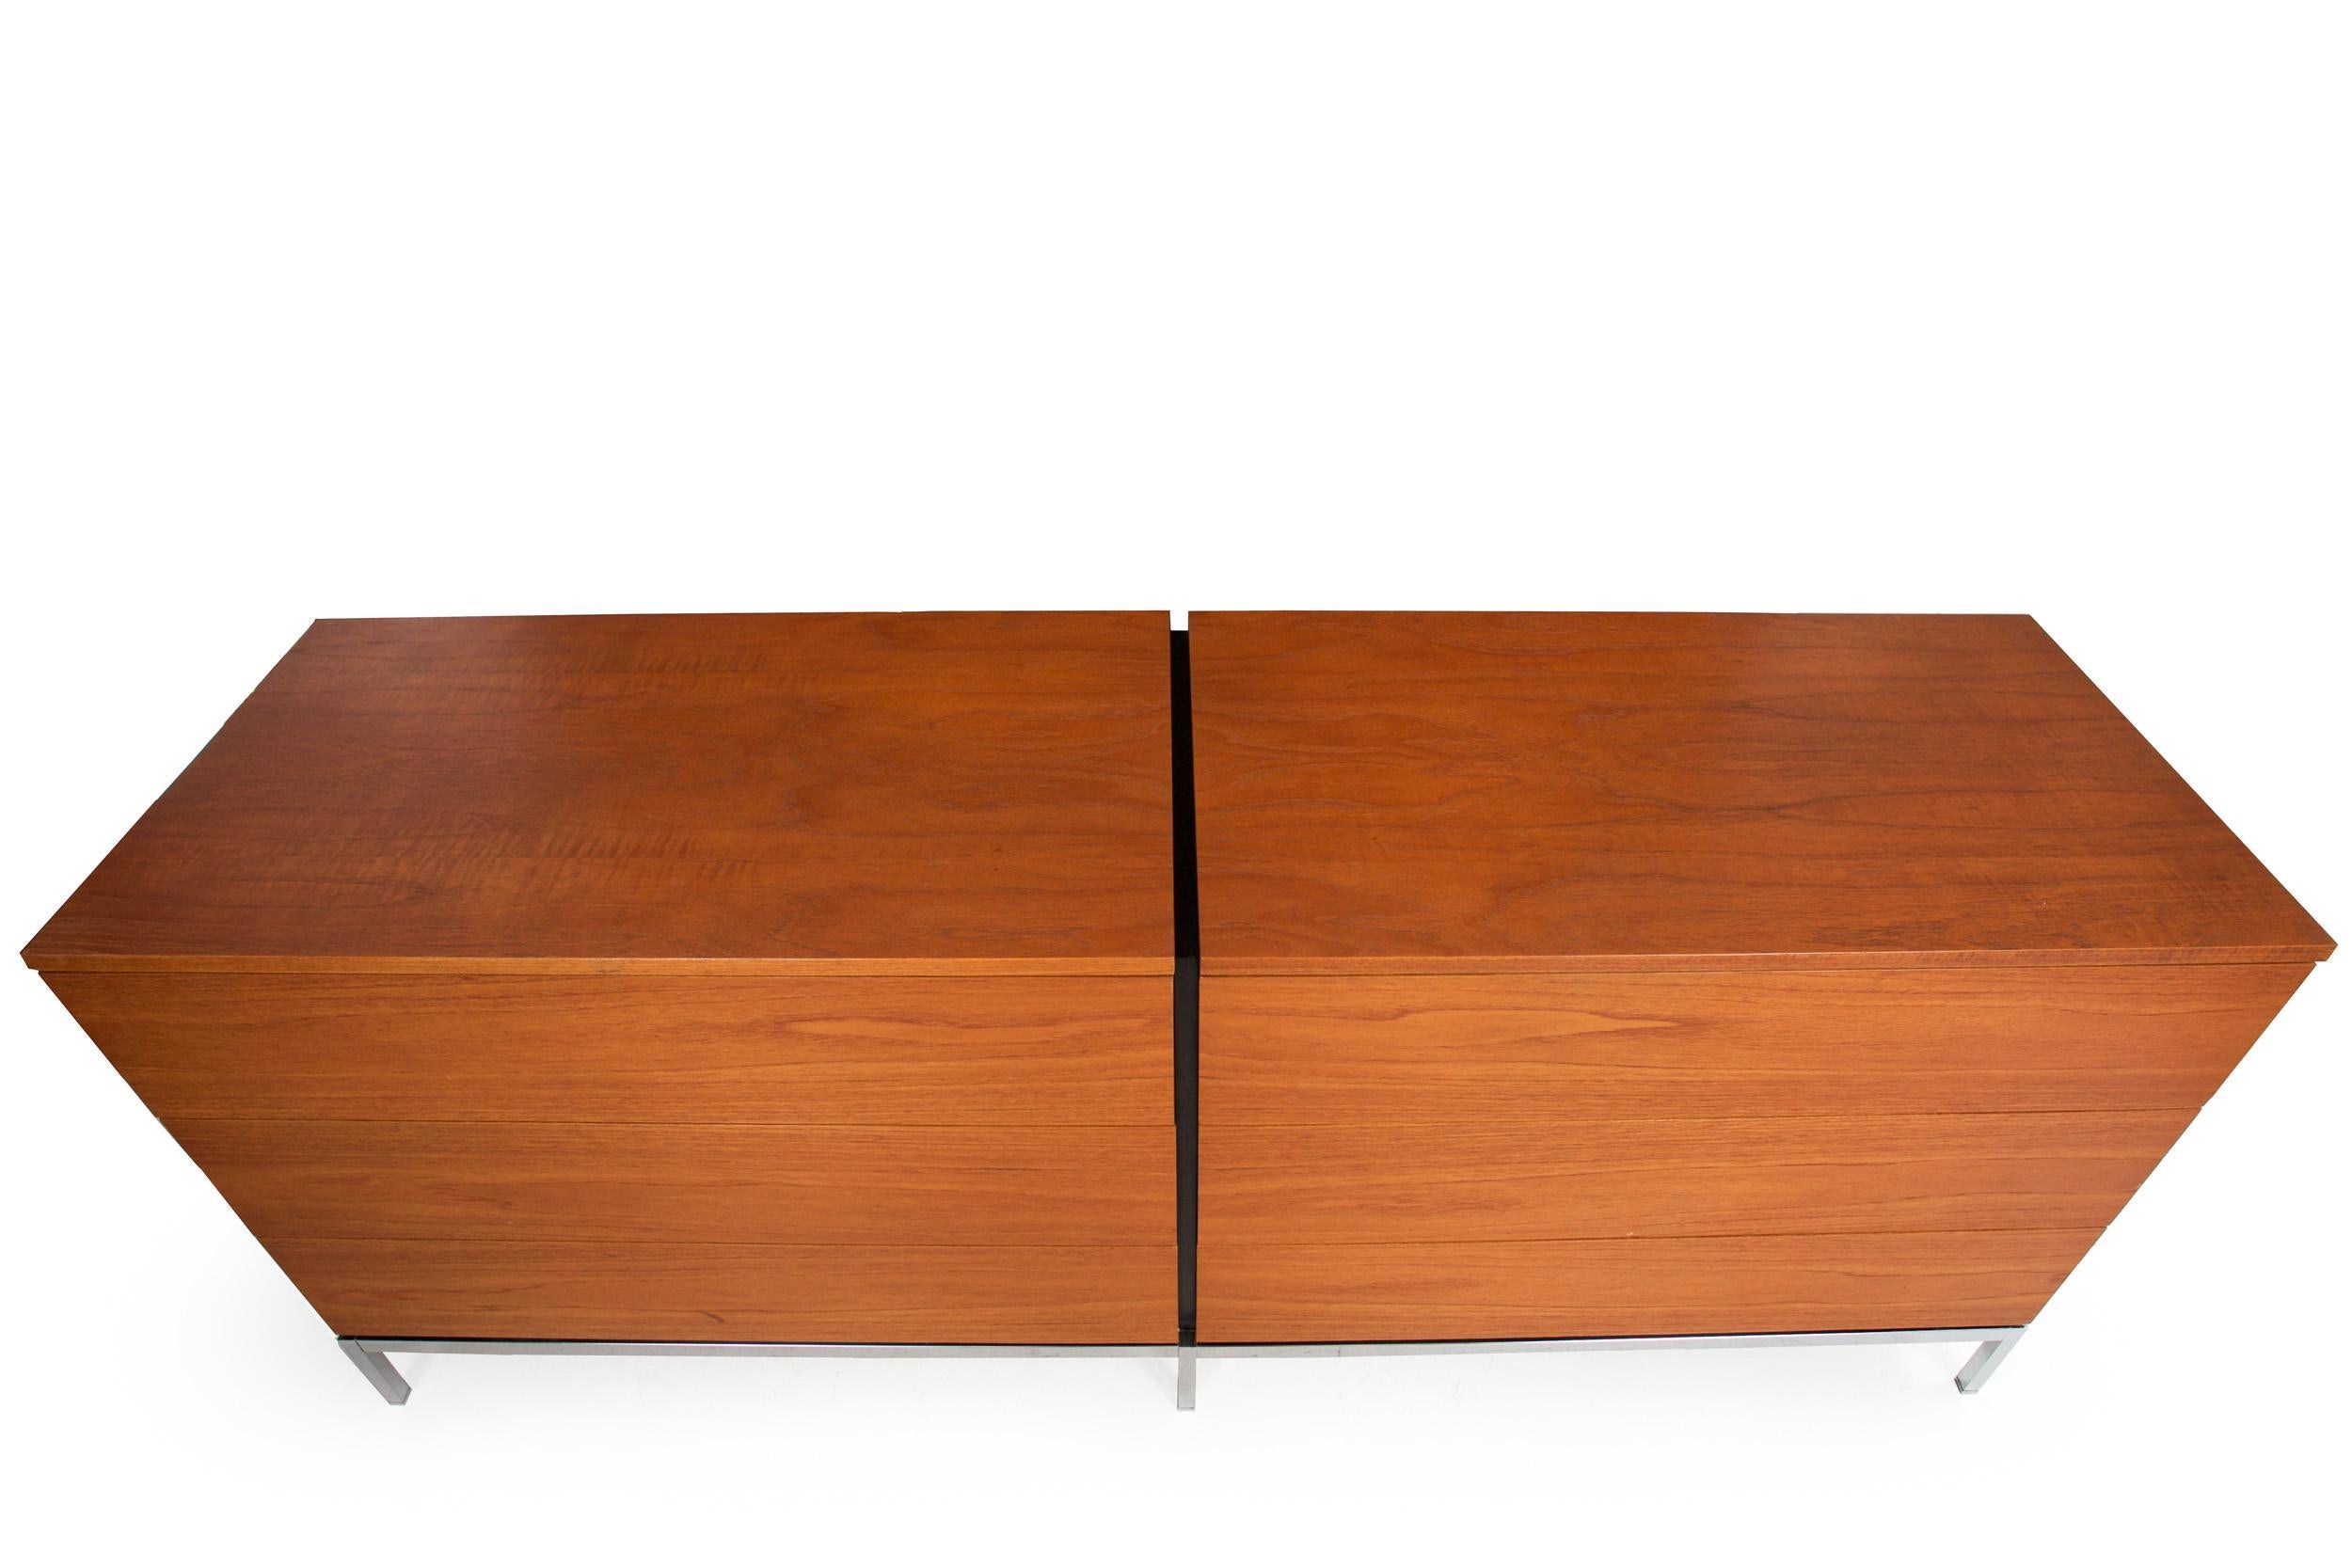 Steel Knoll Mid-Century Modern Teak and Chrome Double Chest Credenza, circa 1970 For Sale